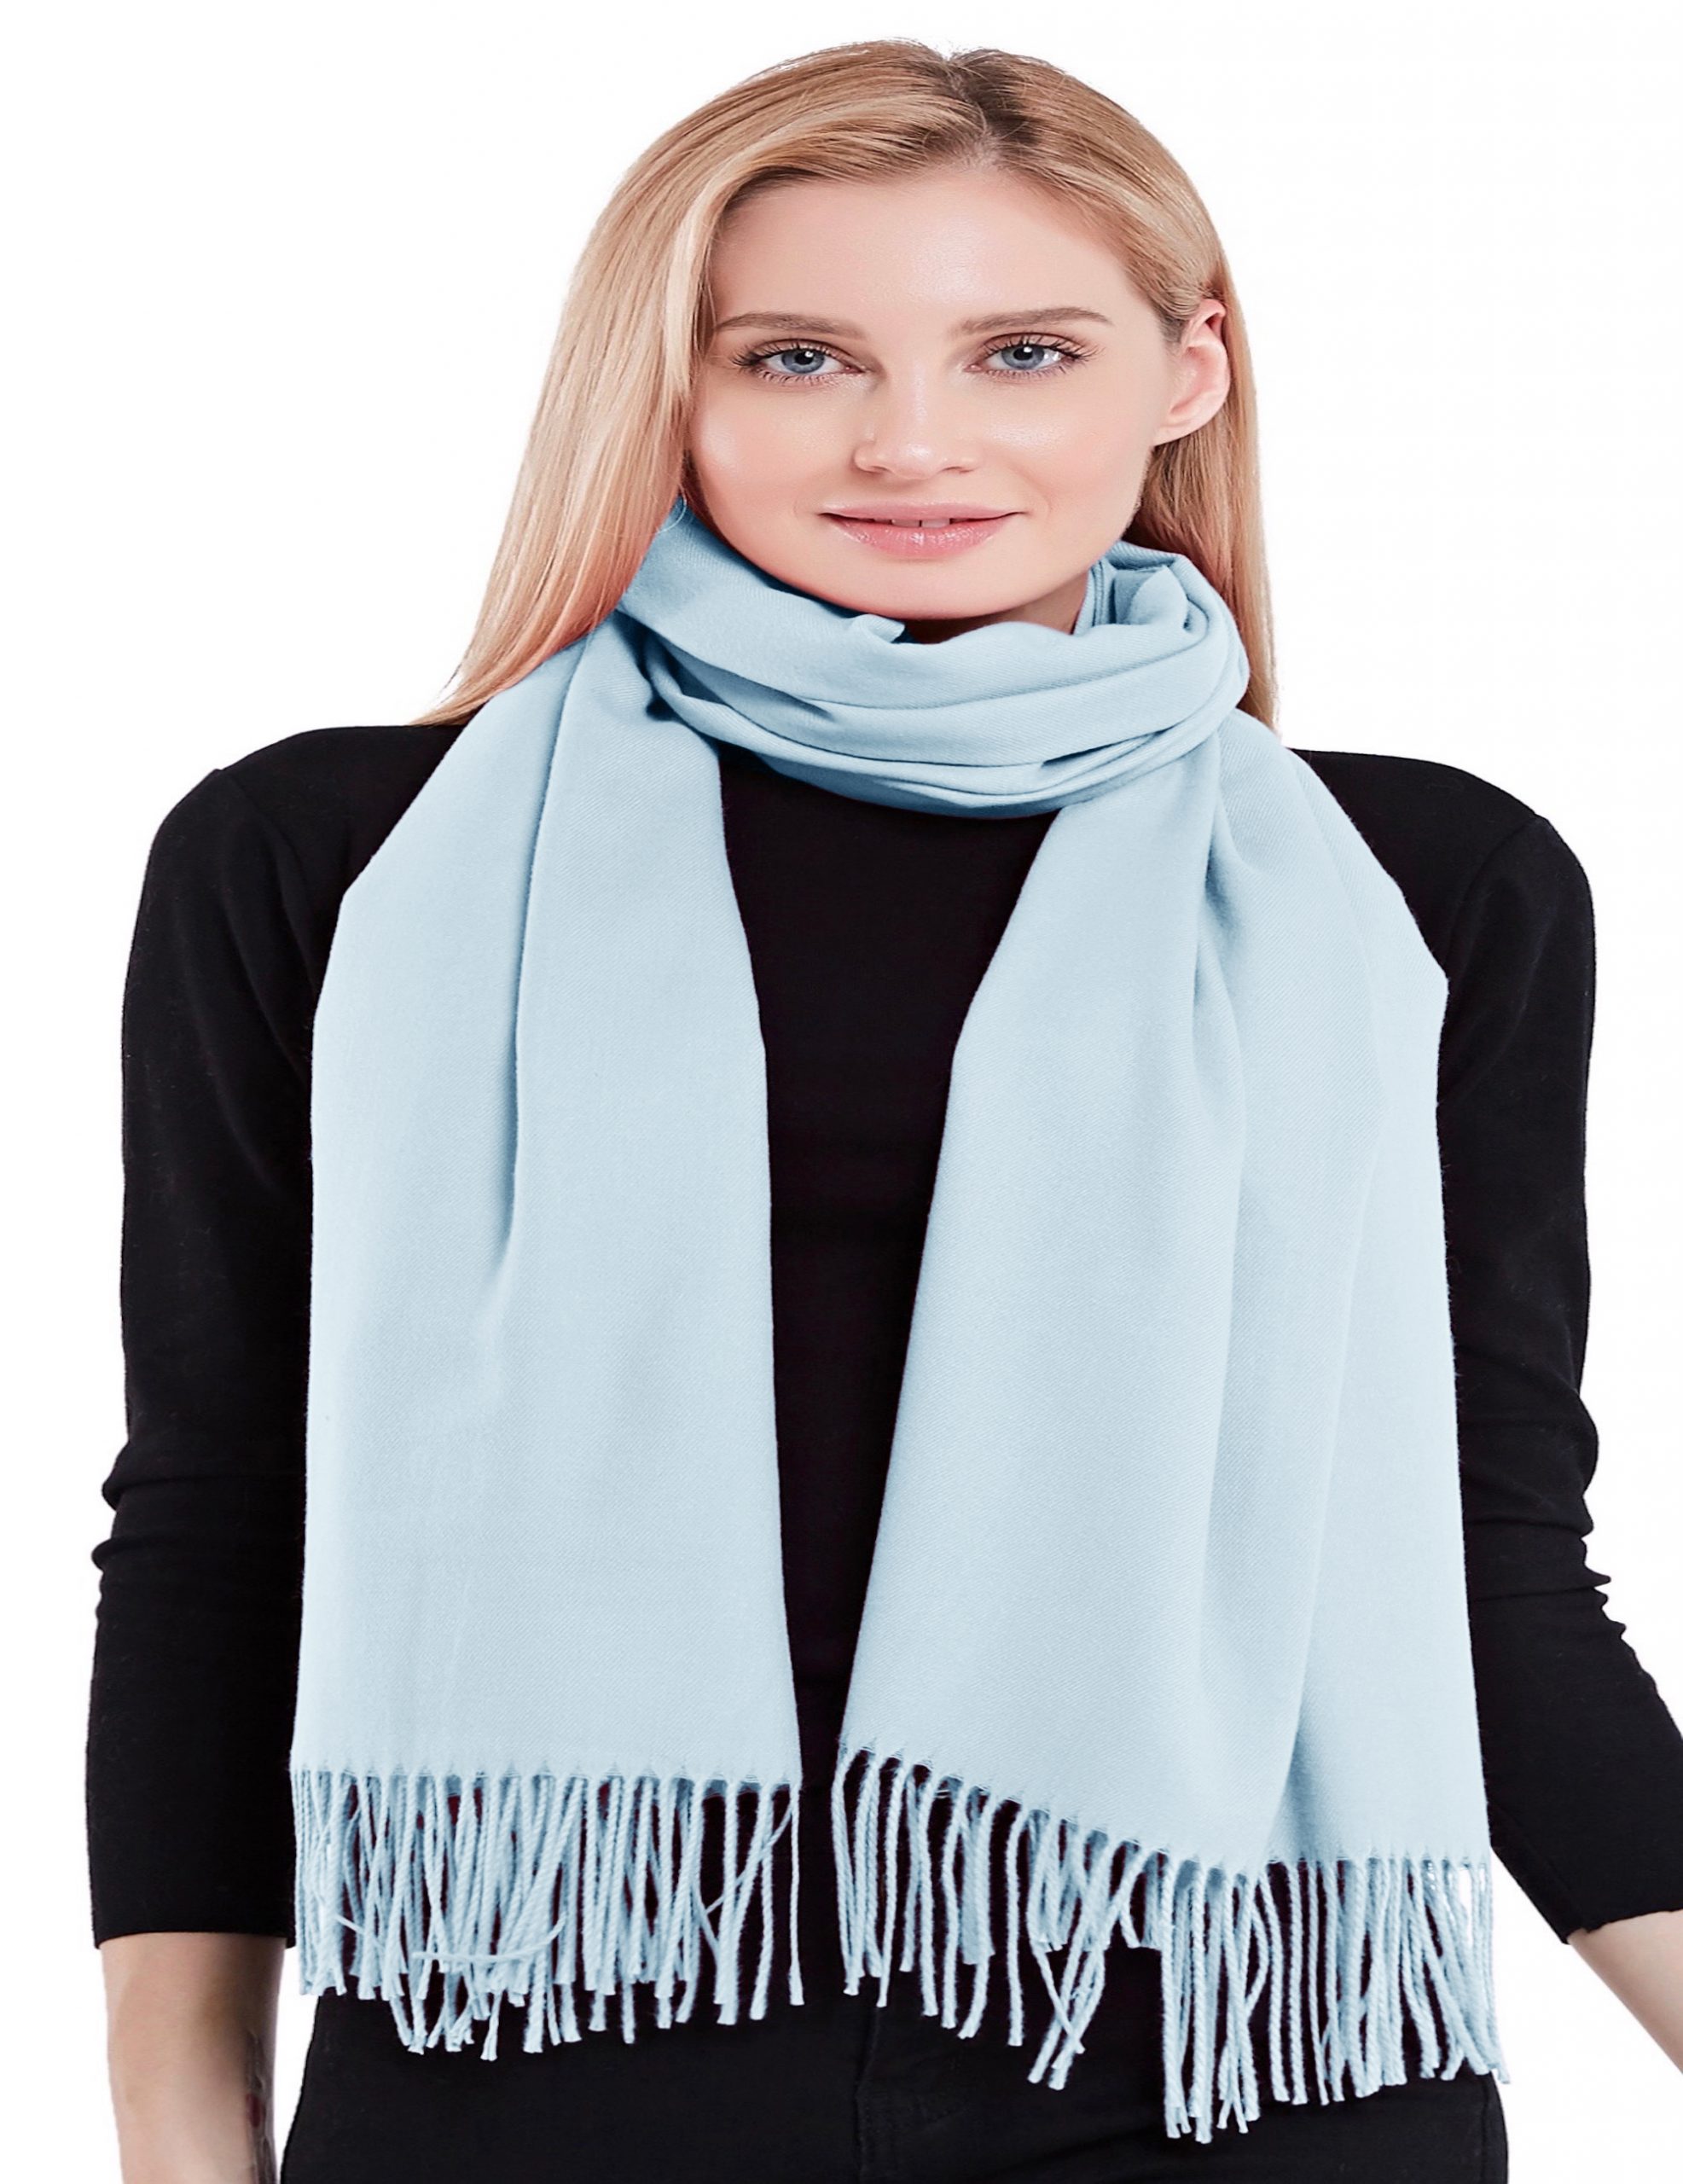 Baby Blue 100% Cashmere 2 Ply Shawl Hand Made from Nepal Scarf Wrap NEW ...